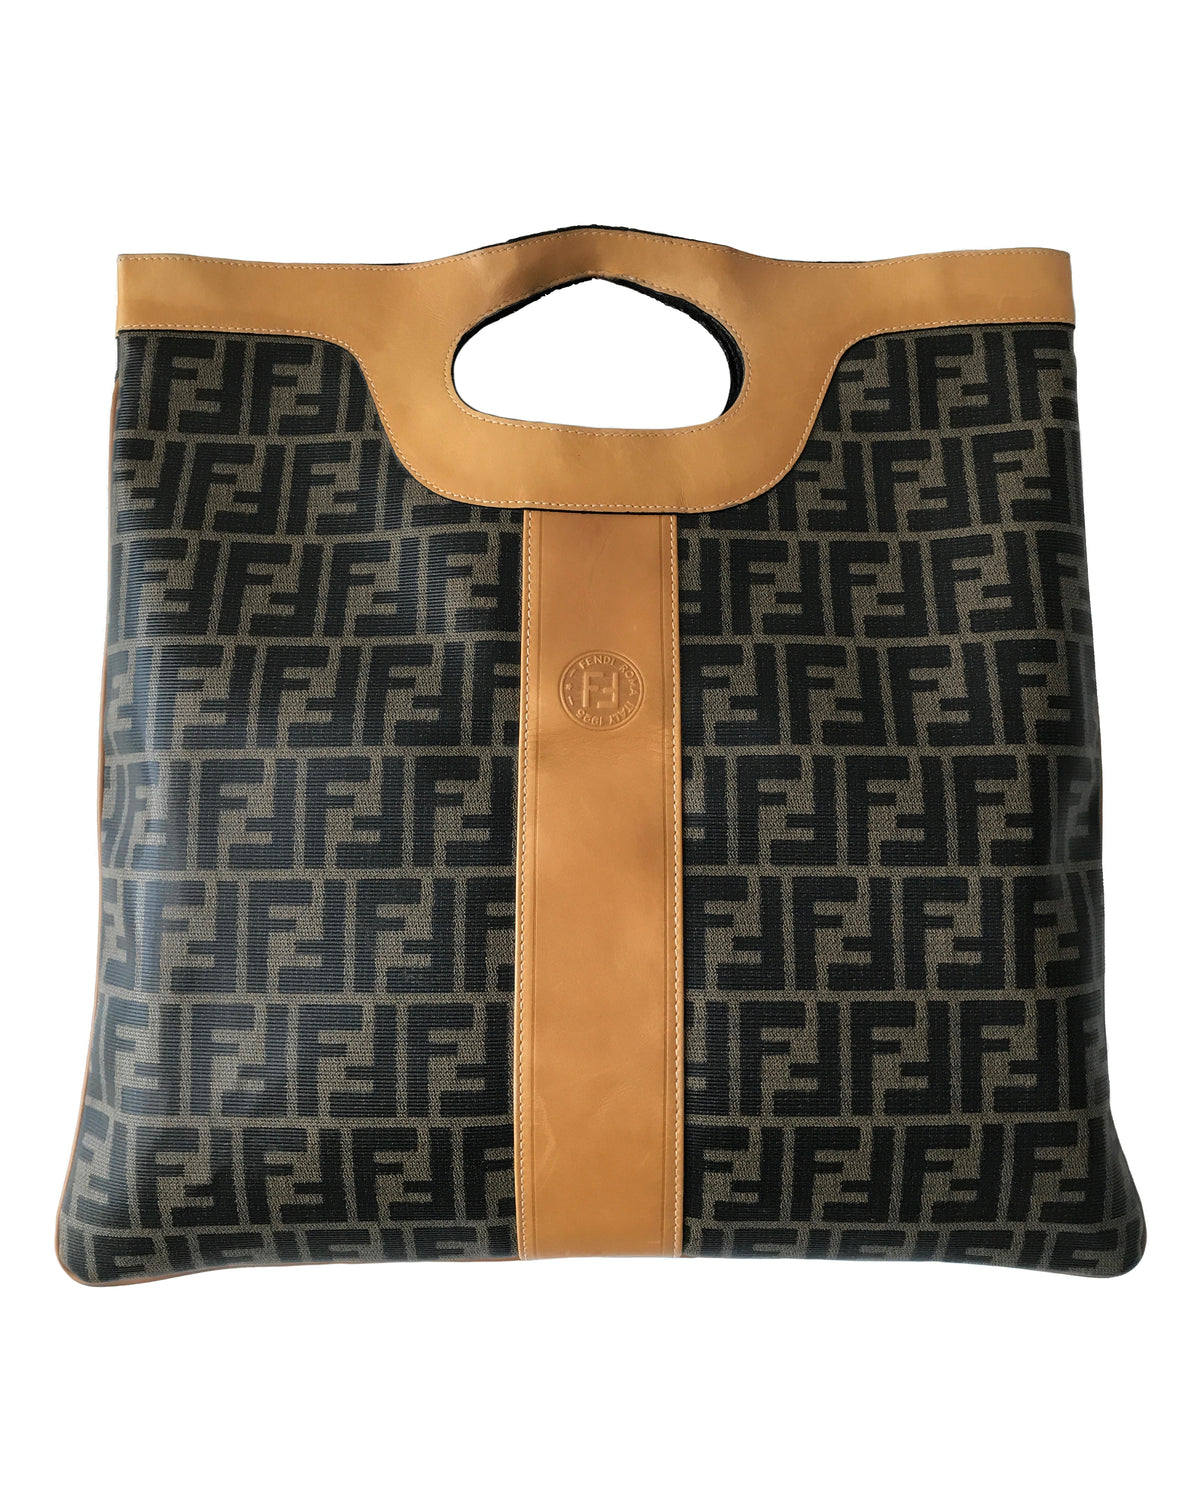 Fruit Vintage Fendi fold over convertible clutch tote bag in the iconic Fendi Zucca monogram canvas with Fendi Logo stamp.